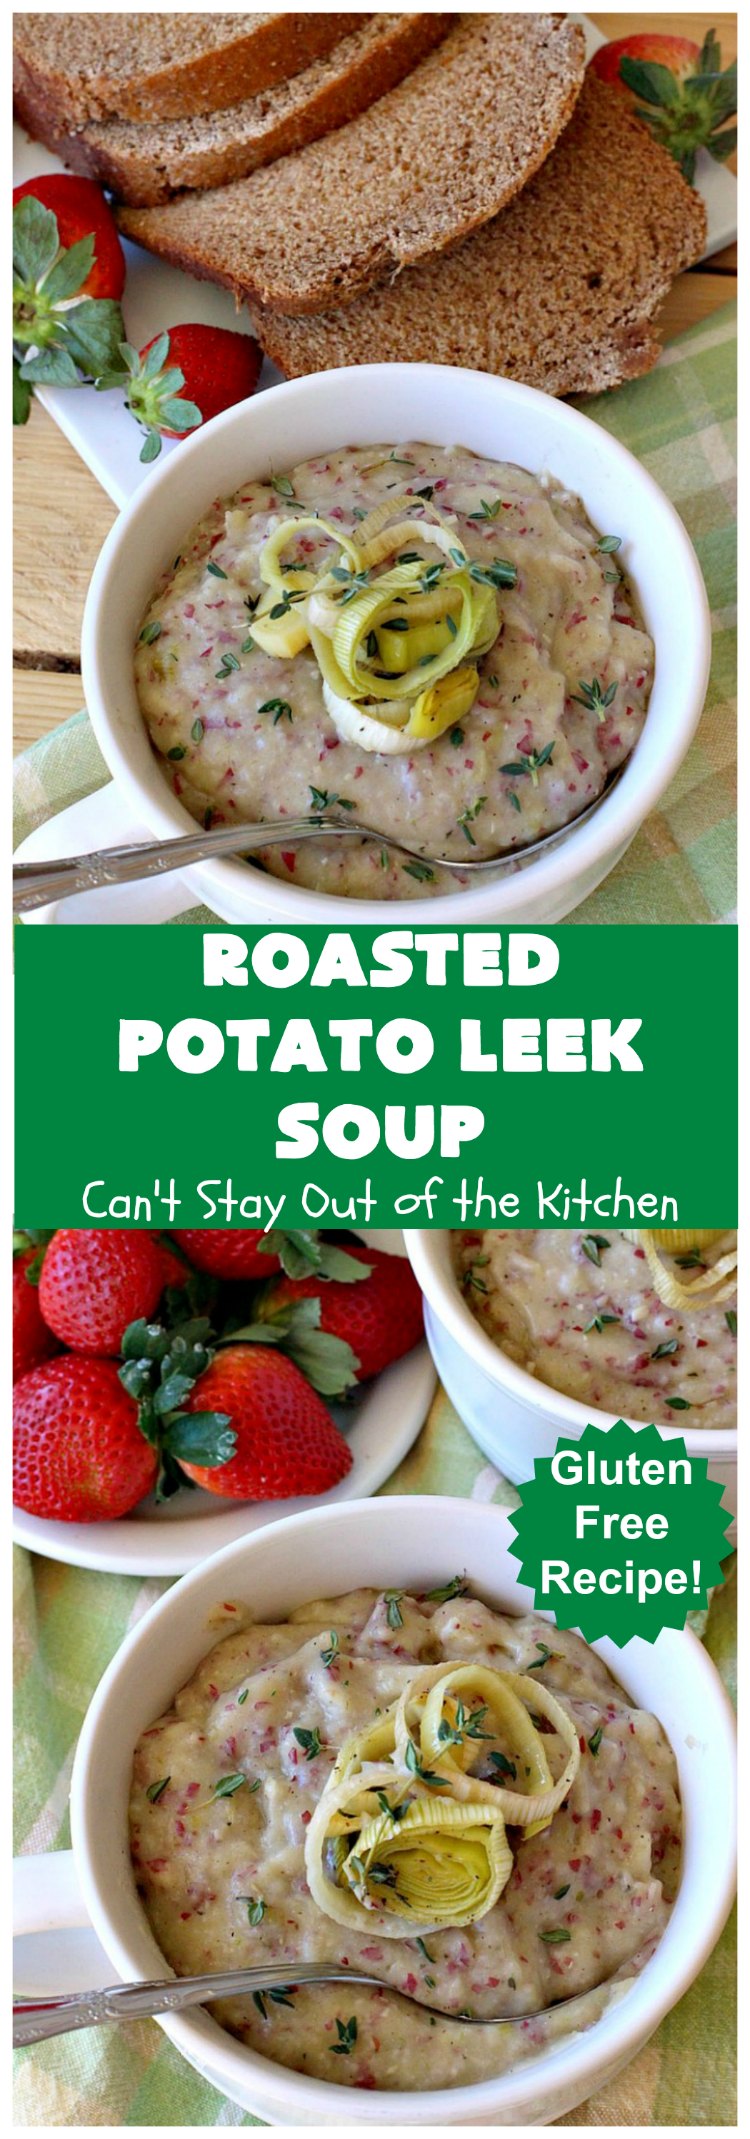 Roasted Potato Leek Soup | Can't Stay Out of the Kitchen